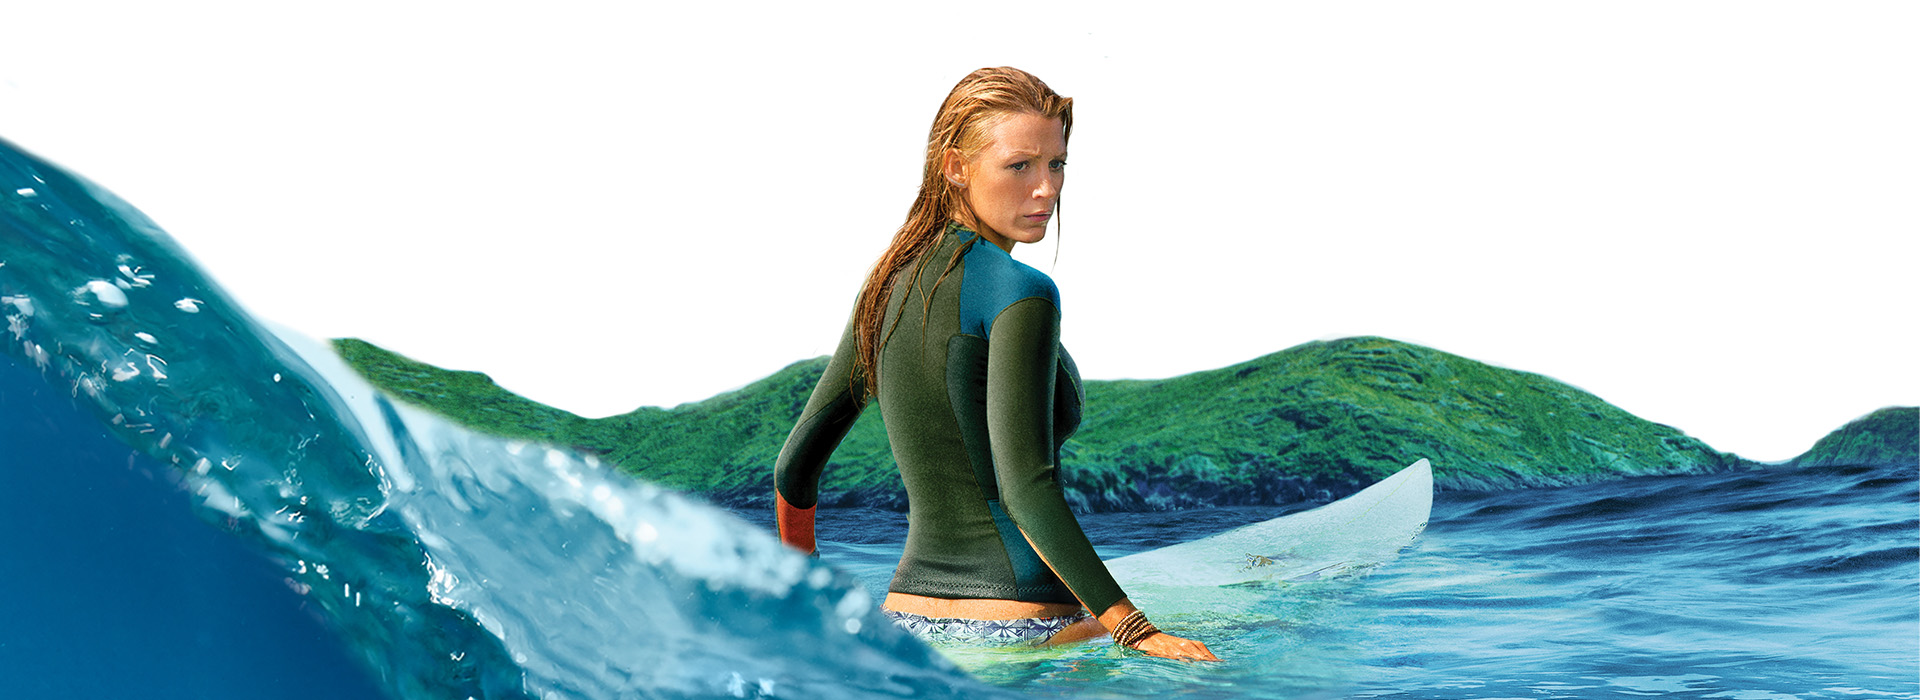 Movie poster The Shallows